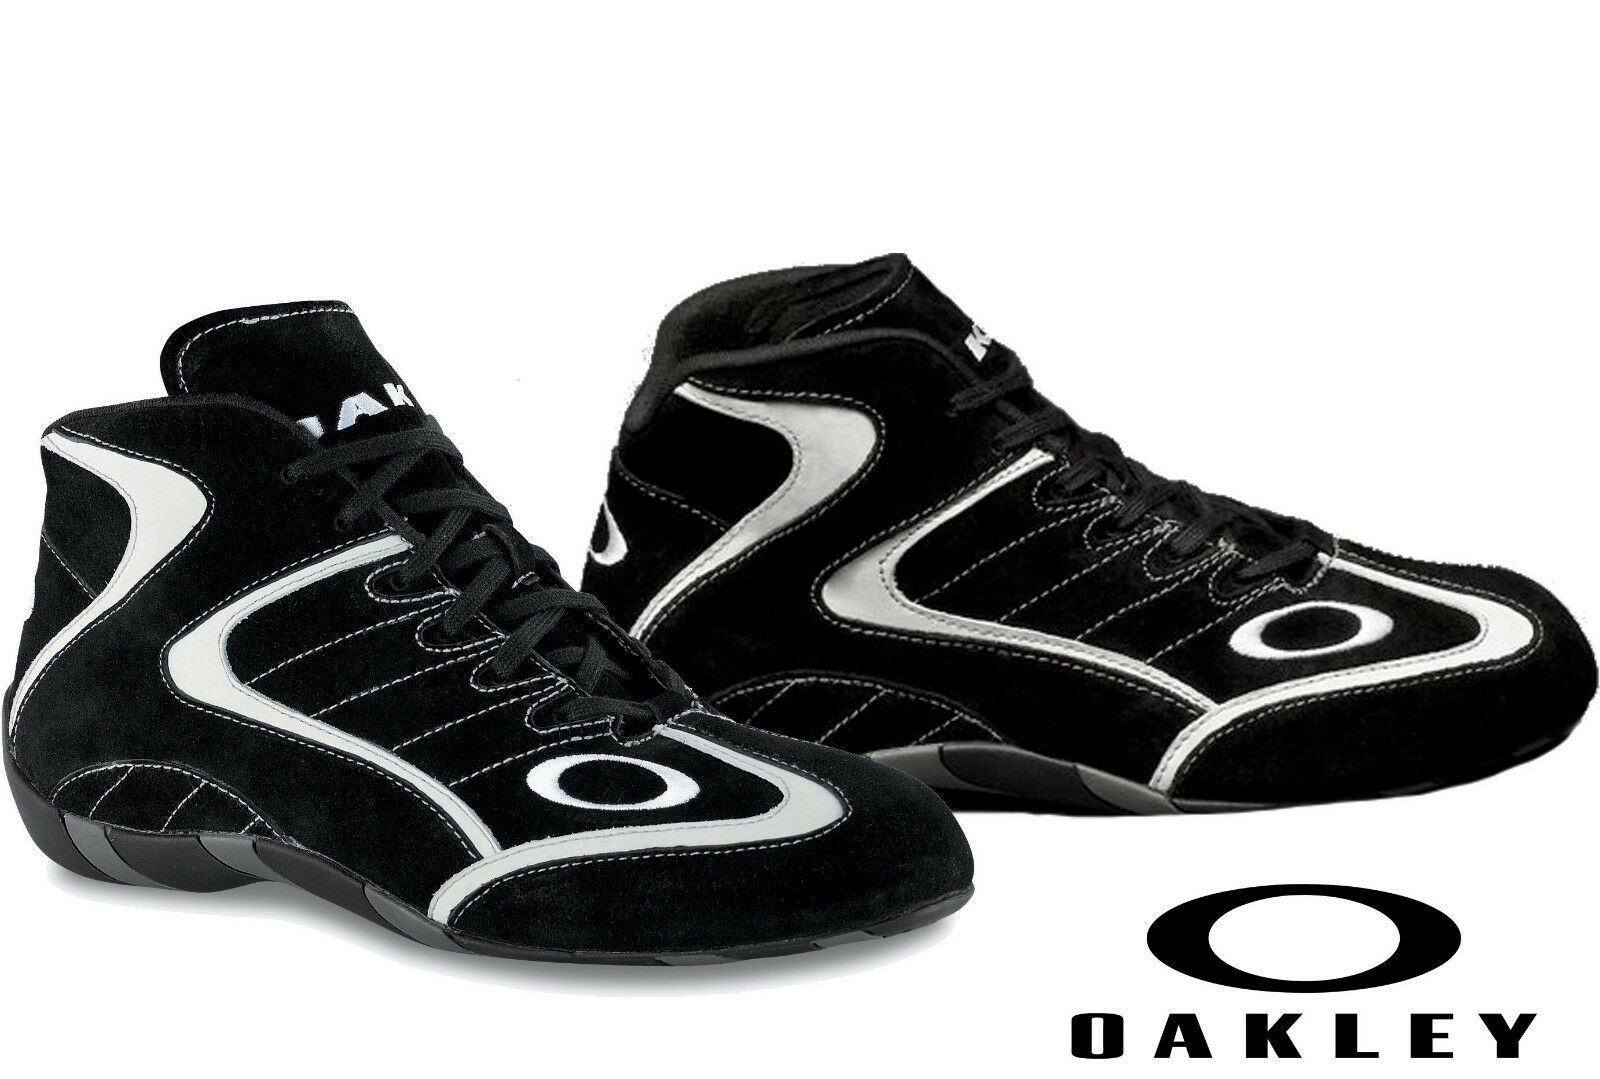 Oakley - Race Mid Fr Auto Racing Shoes - Sfi/fia Auto/karting Sfi-5 Rated Shoes